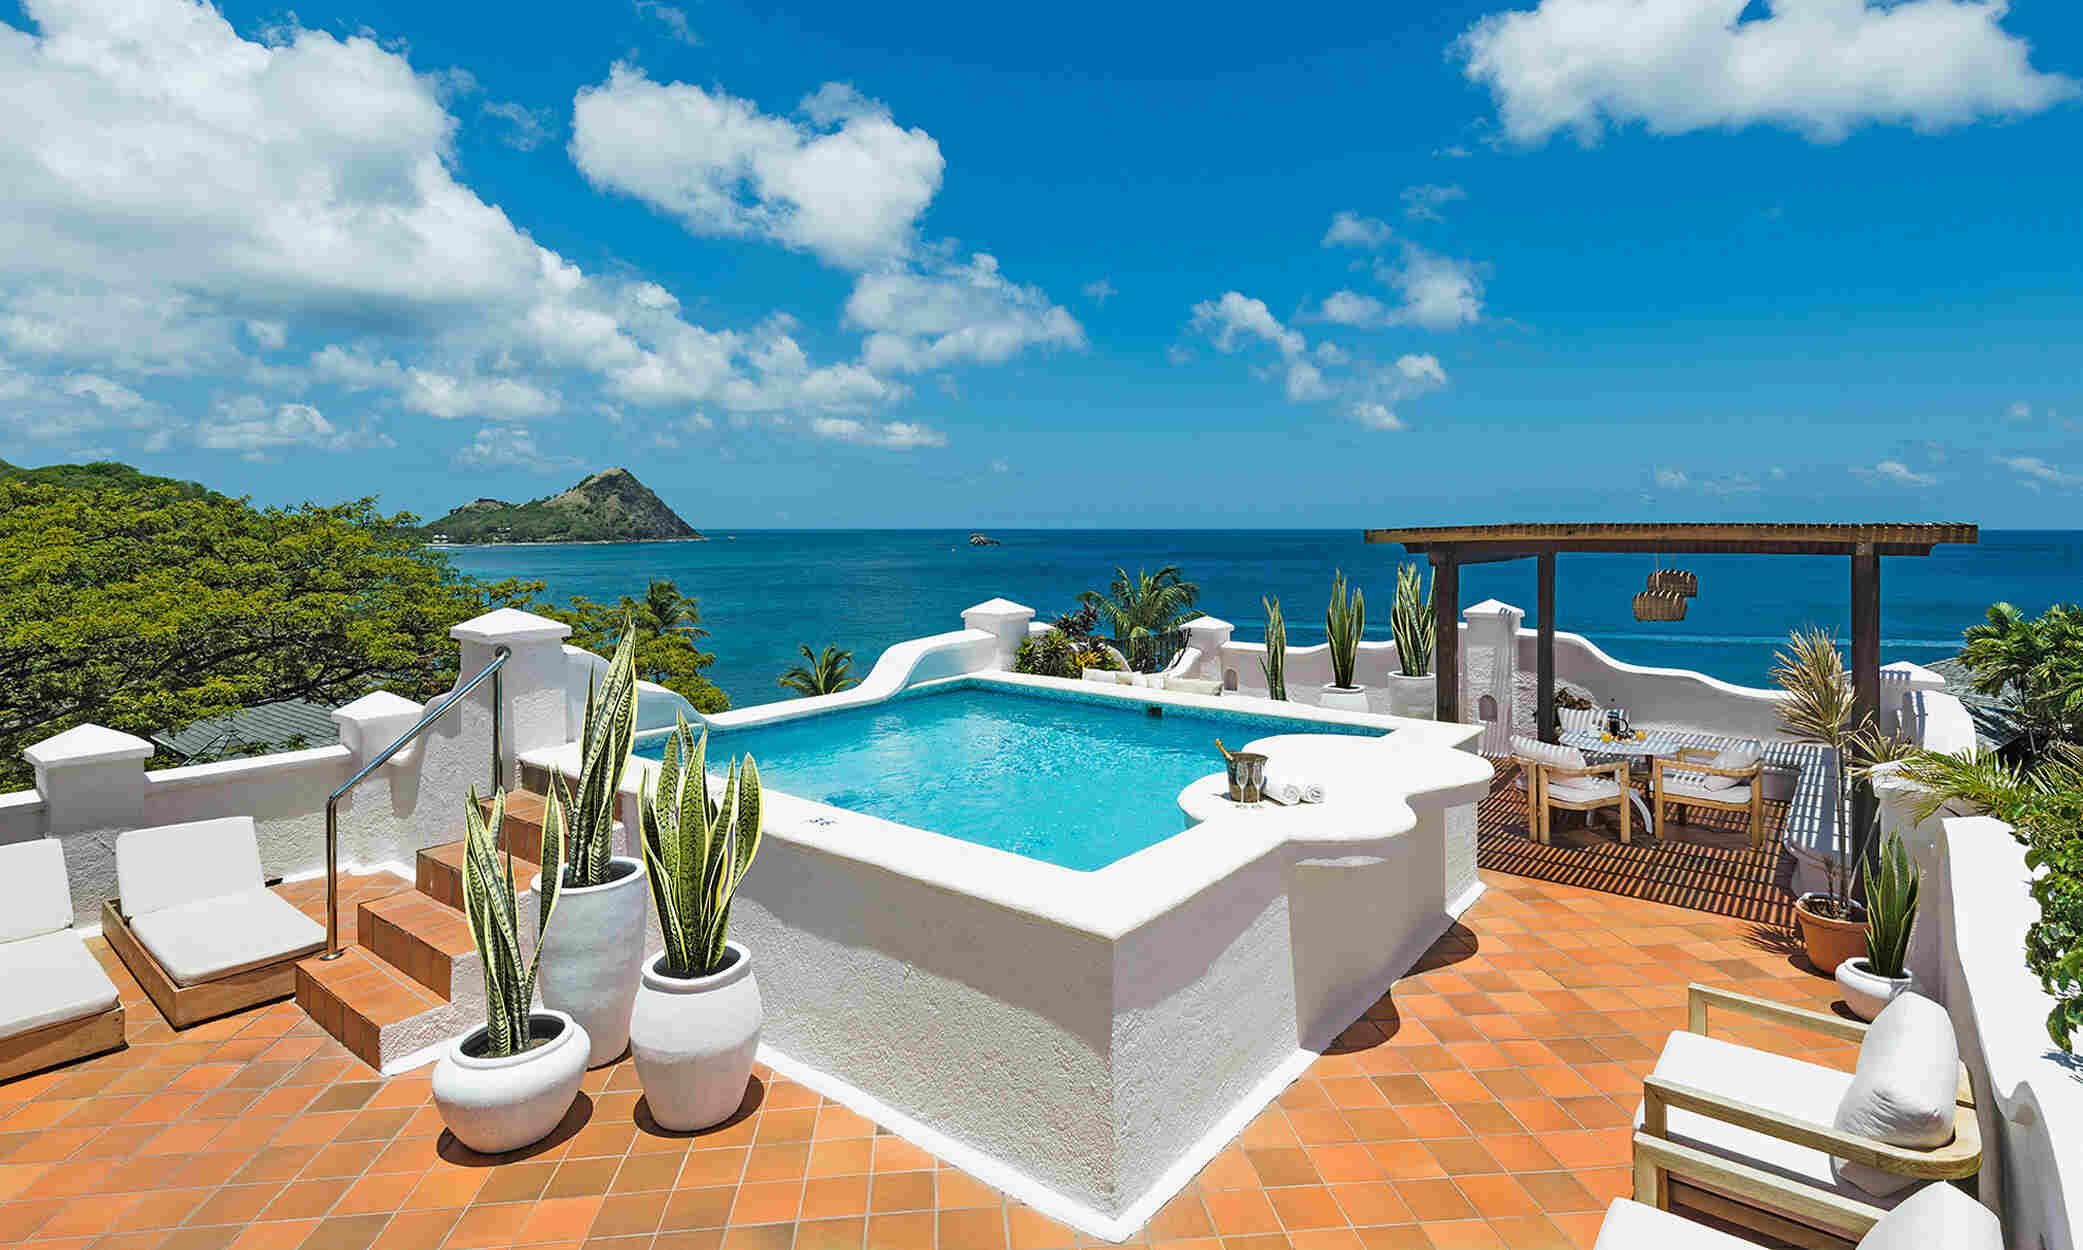 RIF Trust list Cap Maison as one of the five best luxury resorts in St Lucia.